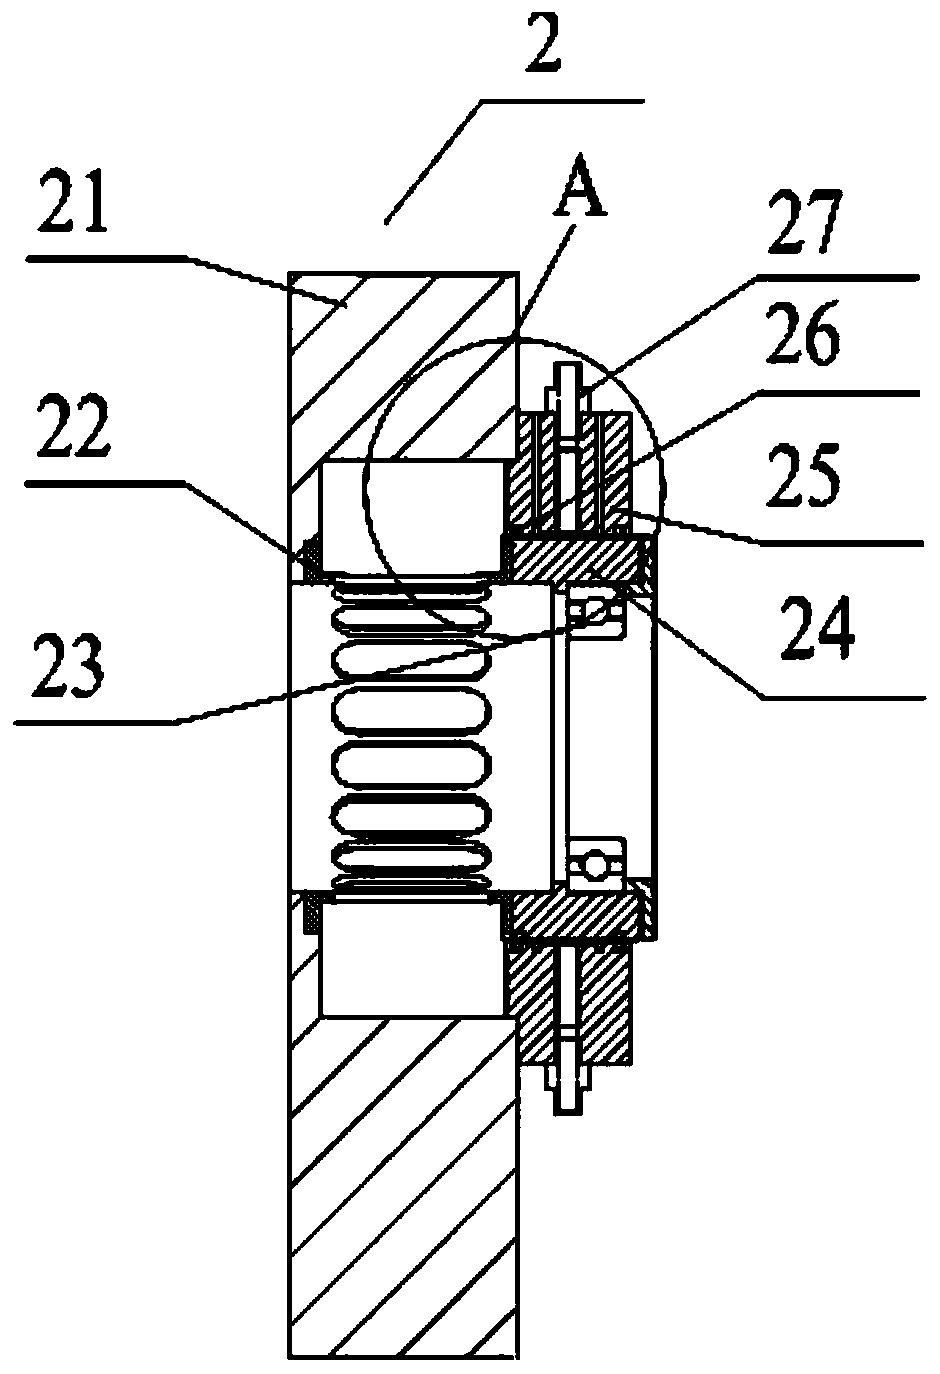 Squeeze oil film damper distributed pressure test device and test method